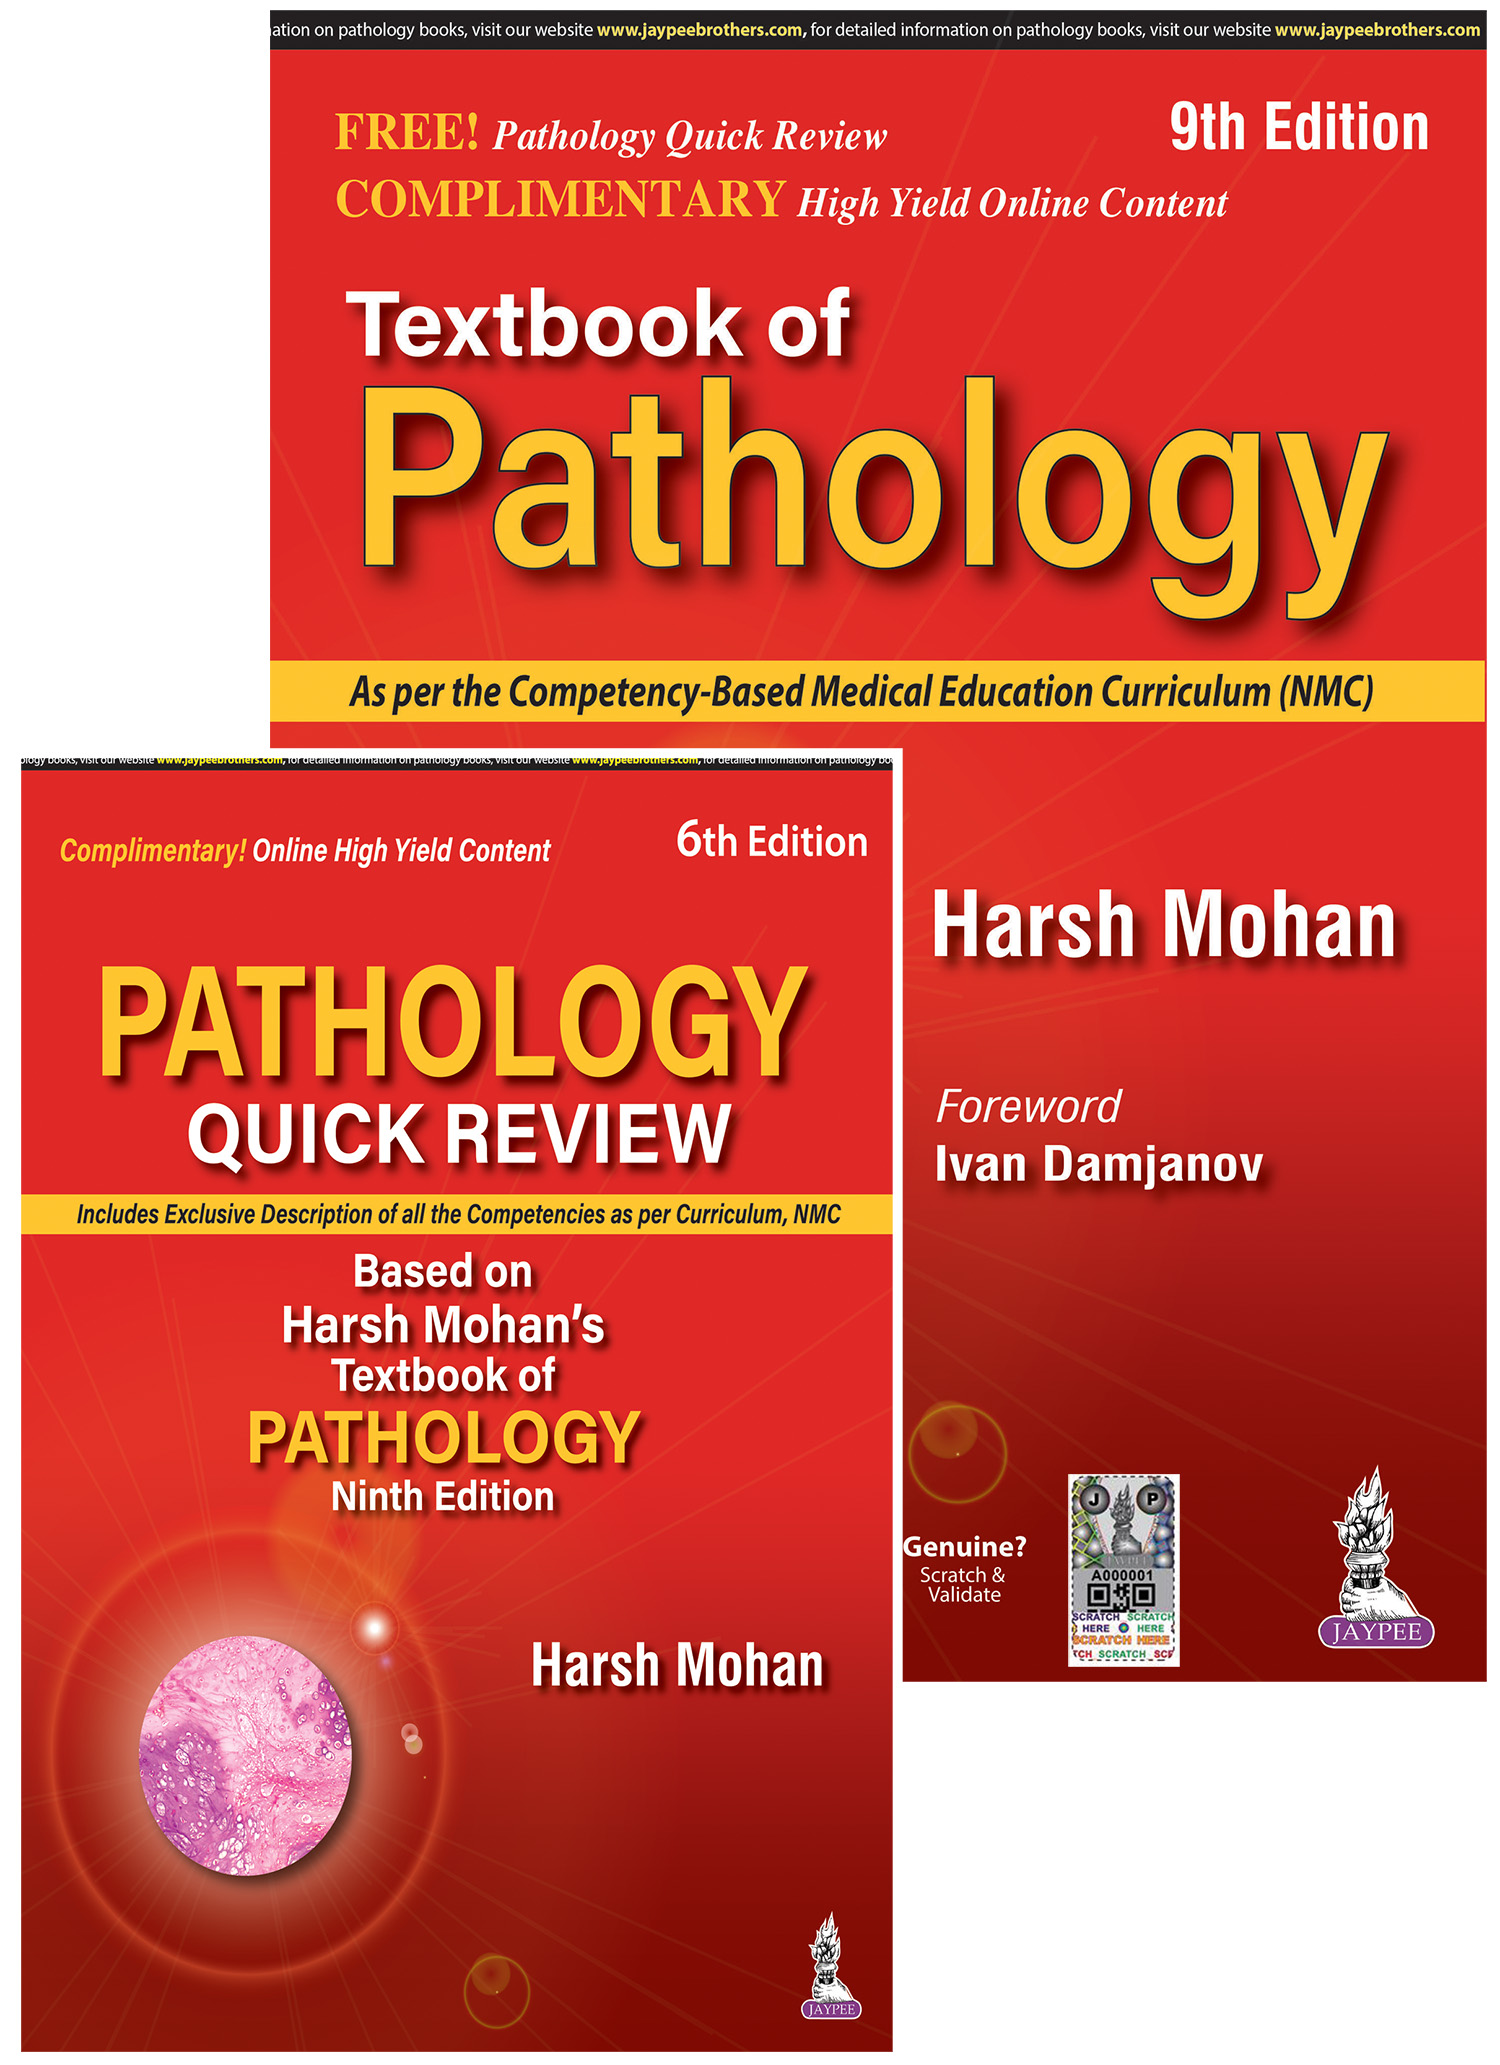 Textbook of Pathology (Free Pathology Quick Review) (Old Edition)